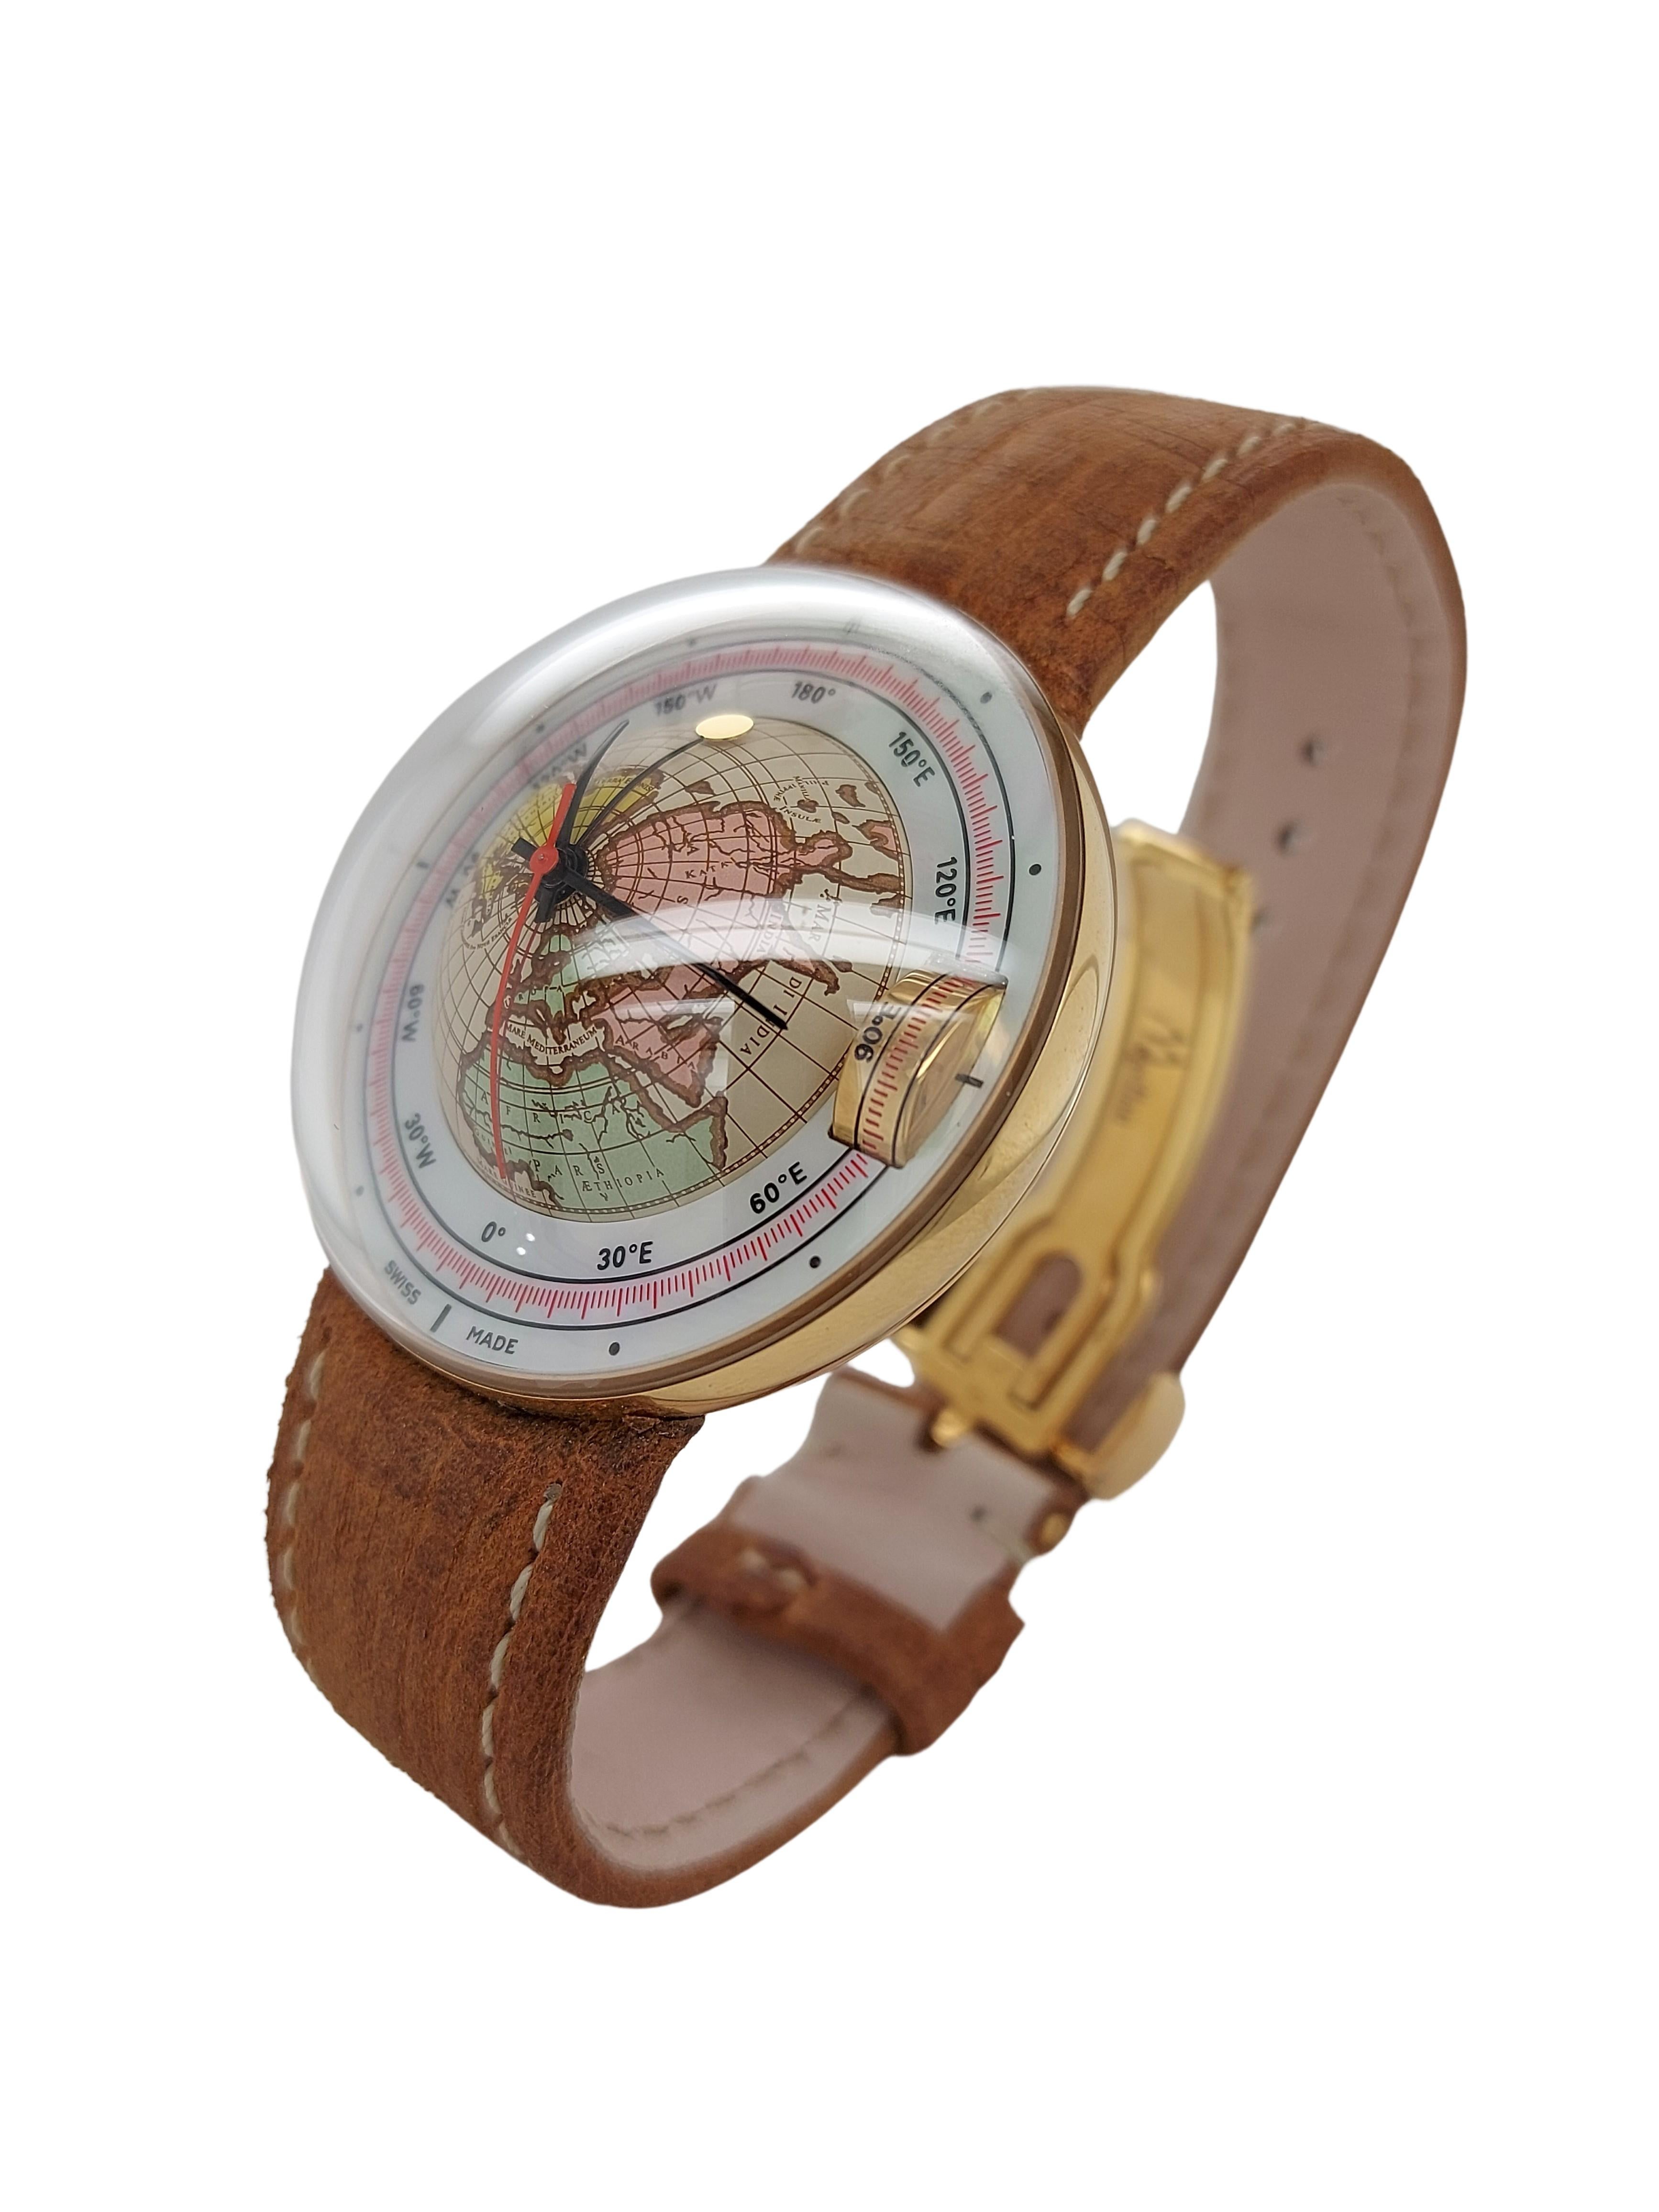 Artisan Magellan 1521 World Time Gold Watch Depicting Northern 3D Hemisphere, Automatic For Sale